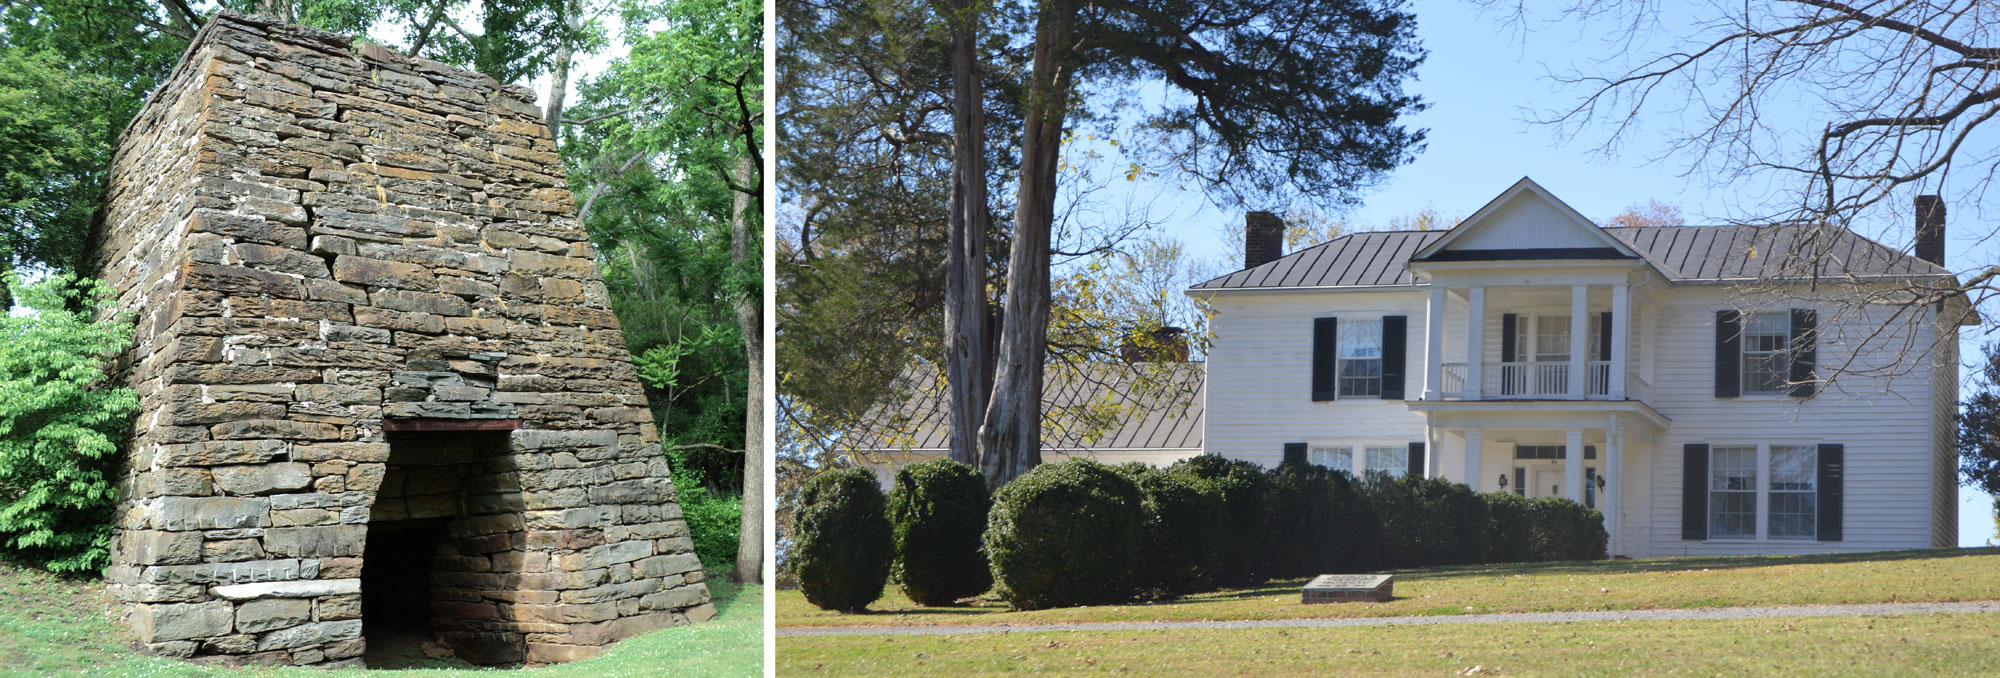 2-panel figure showing structures associated with historical iron works in Virginian. Panel 1: A stone iron furnace built around 1770. Panel 2: A two-story house used at the ironmaster's quarters built in the early 1800's.